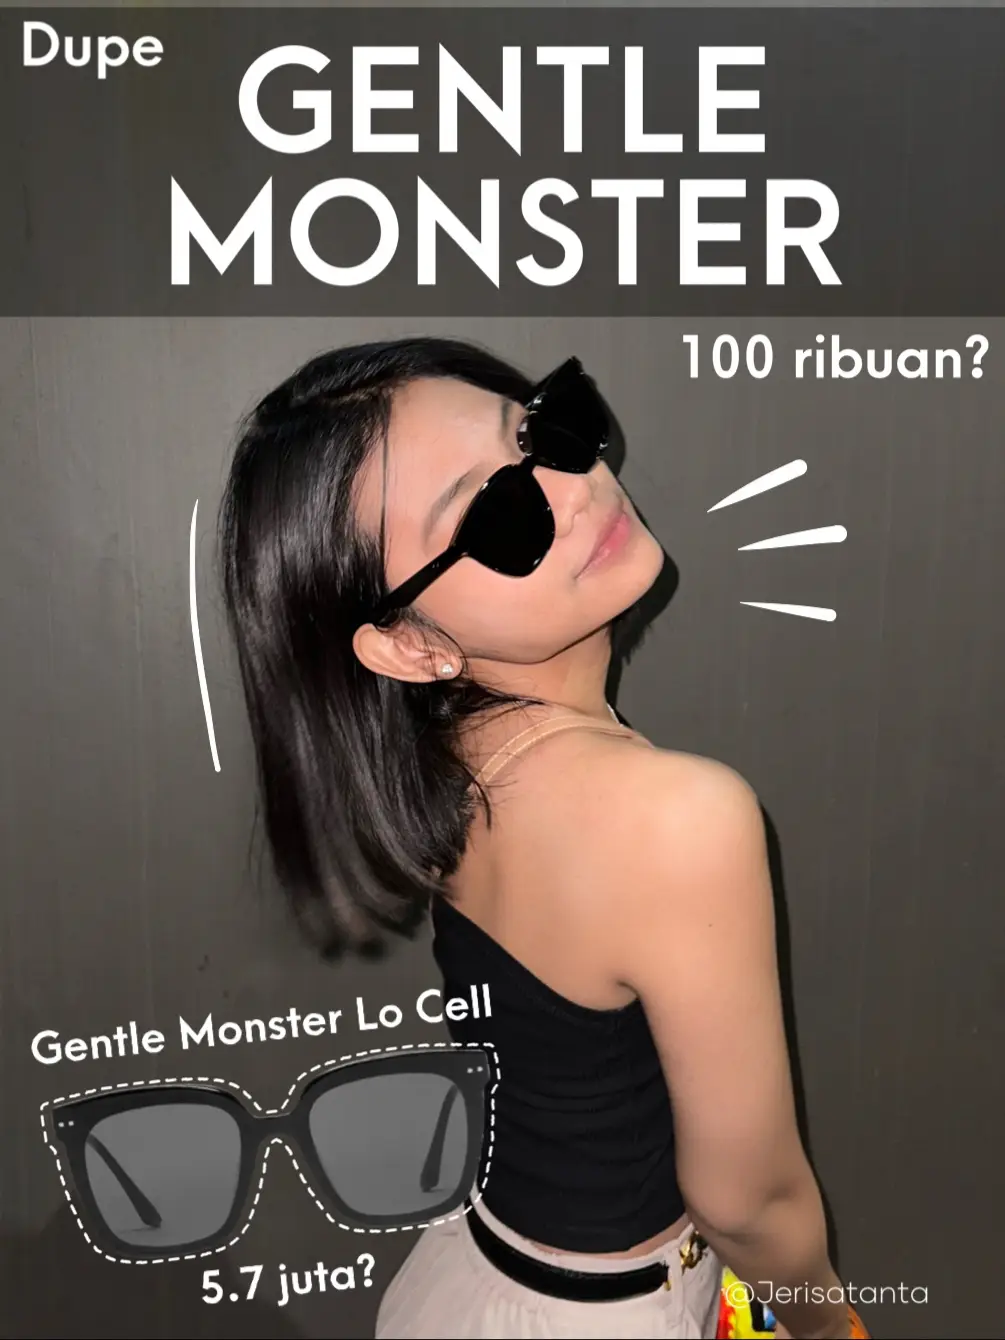 Dupe Gentle Monster Lo Cell 100 ribuan doang?😎 | Gallery posted